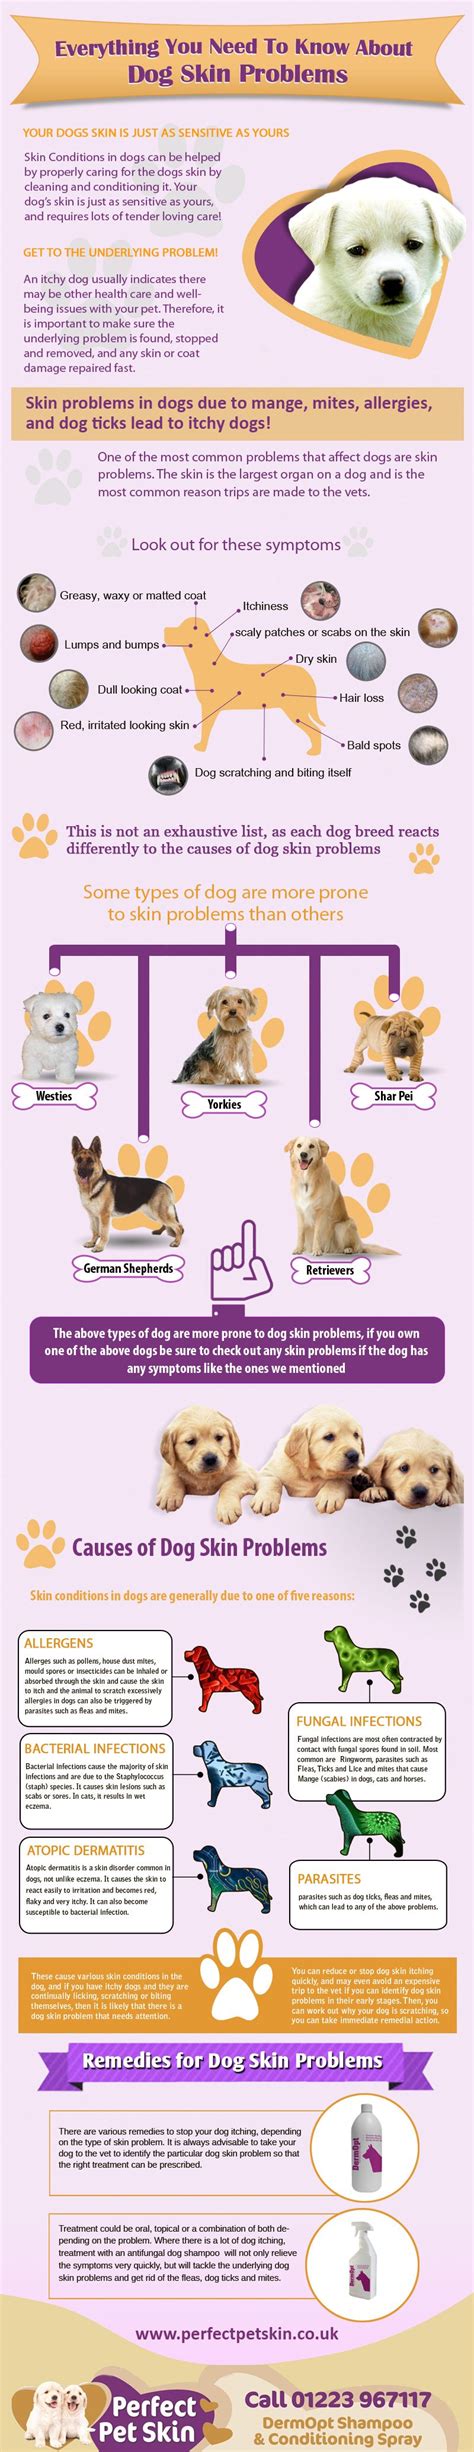 Dog Skin Problems Are Very Common This Infographic Will Help You